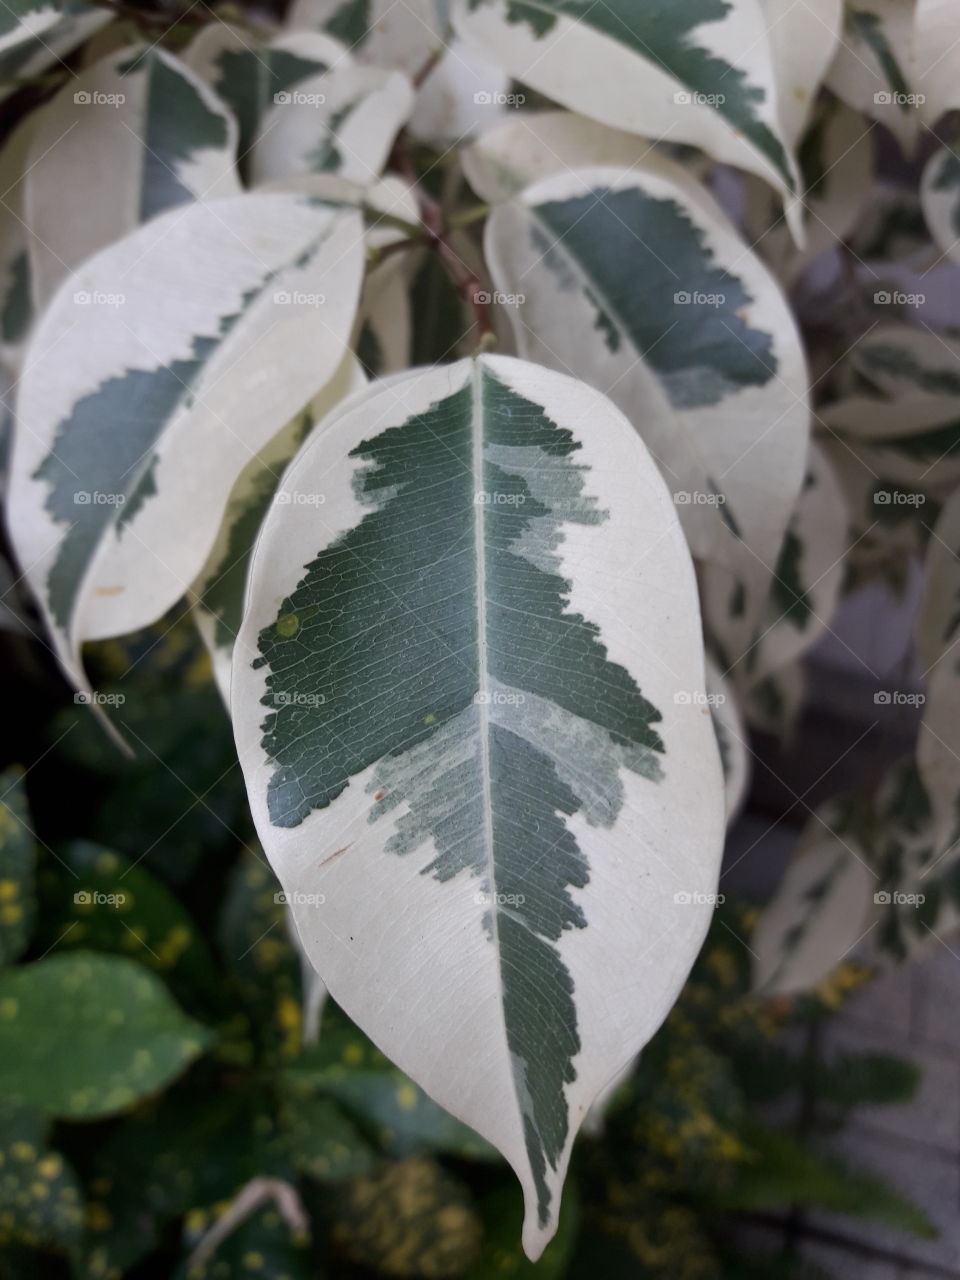 two color special leafs.